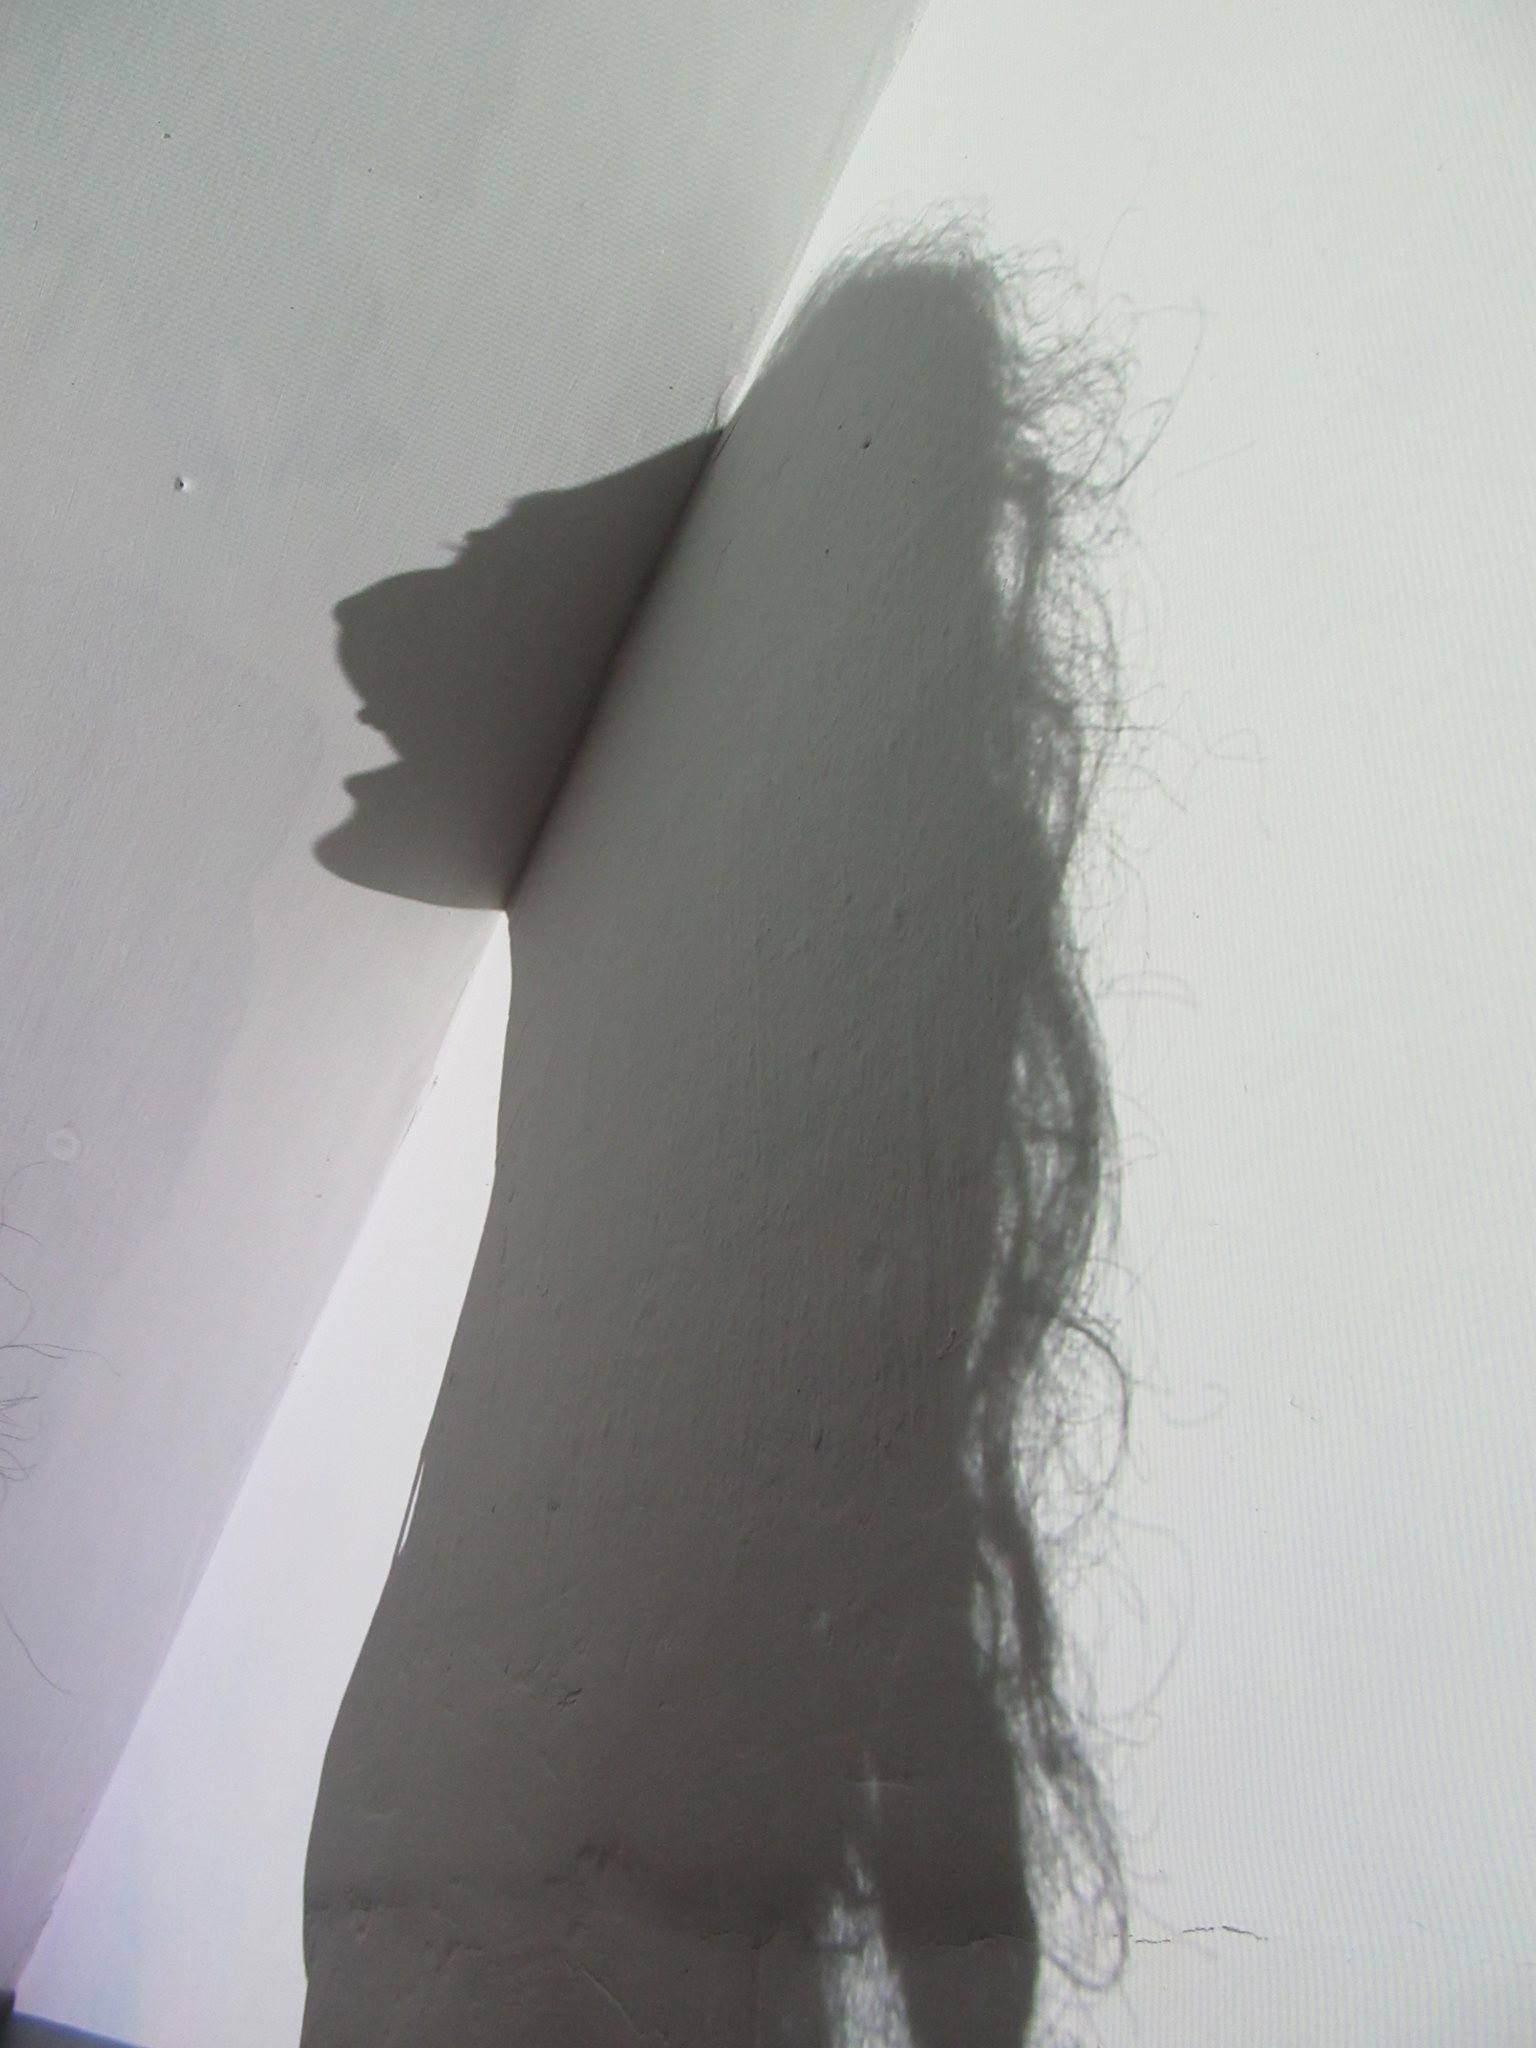 Photograph of the shadow cast by a head against a corner.